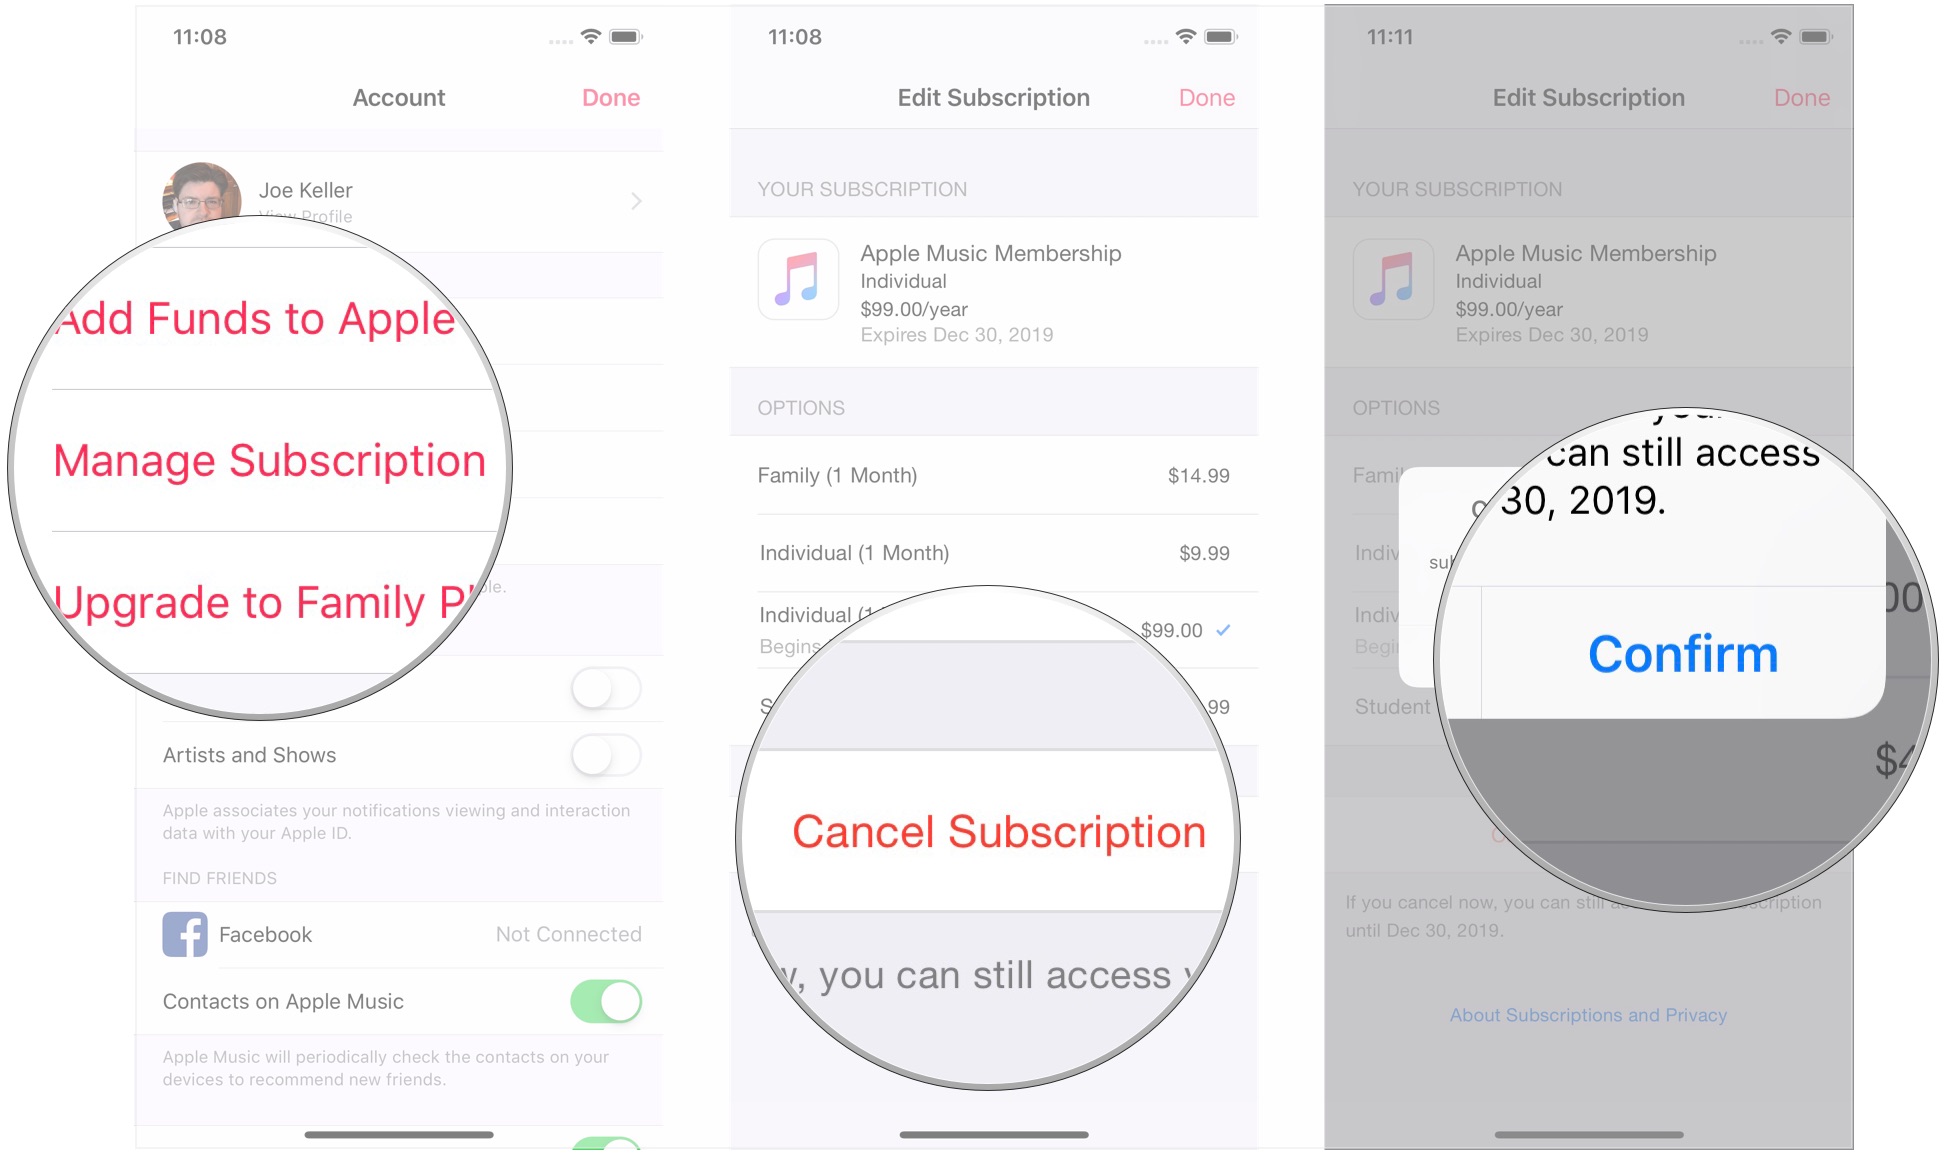 Cancel your Apple Music subscription on iPhone by showing: Tap Manage Subscriptions, tap Cancel Subscription, Confirm